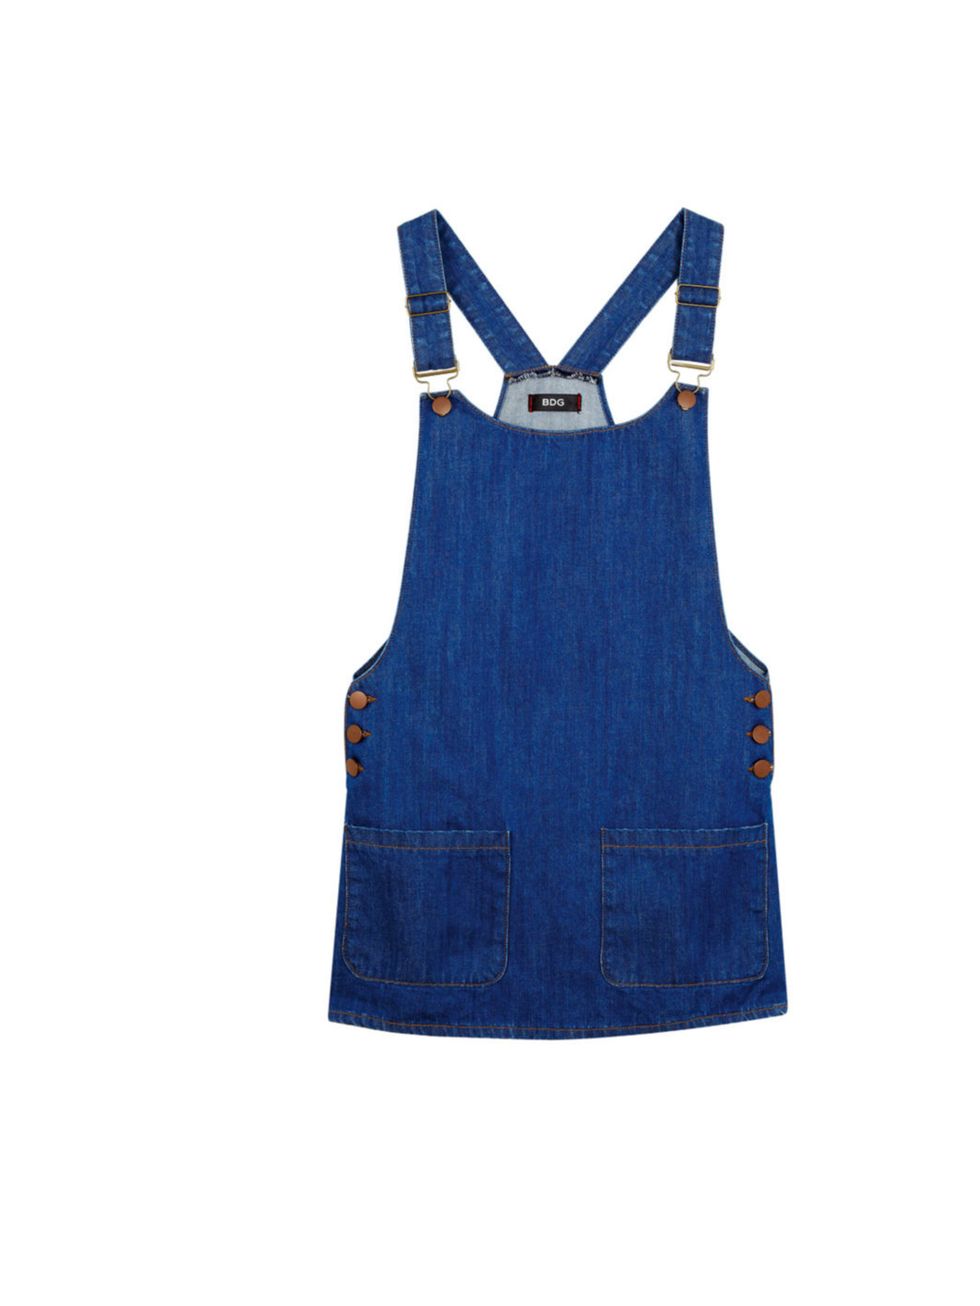 <p>Usher some Parisian chic into your downtime with this preppy dungaree dress... BDG denim dungaree dress, £58, at <a href="http://www.urbanoutfitters.co.uk/bdg-denim-dungaree-dress/invt/5130425825555/&amp;colour=Denim">Urban Outfitters</a></p>